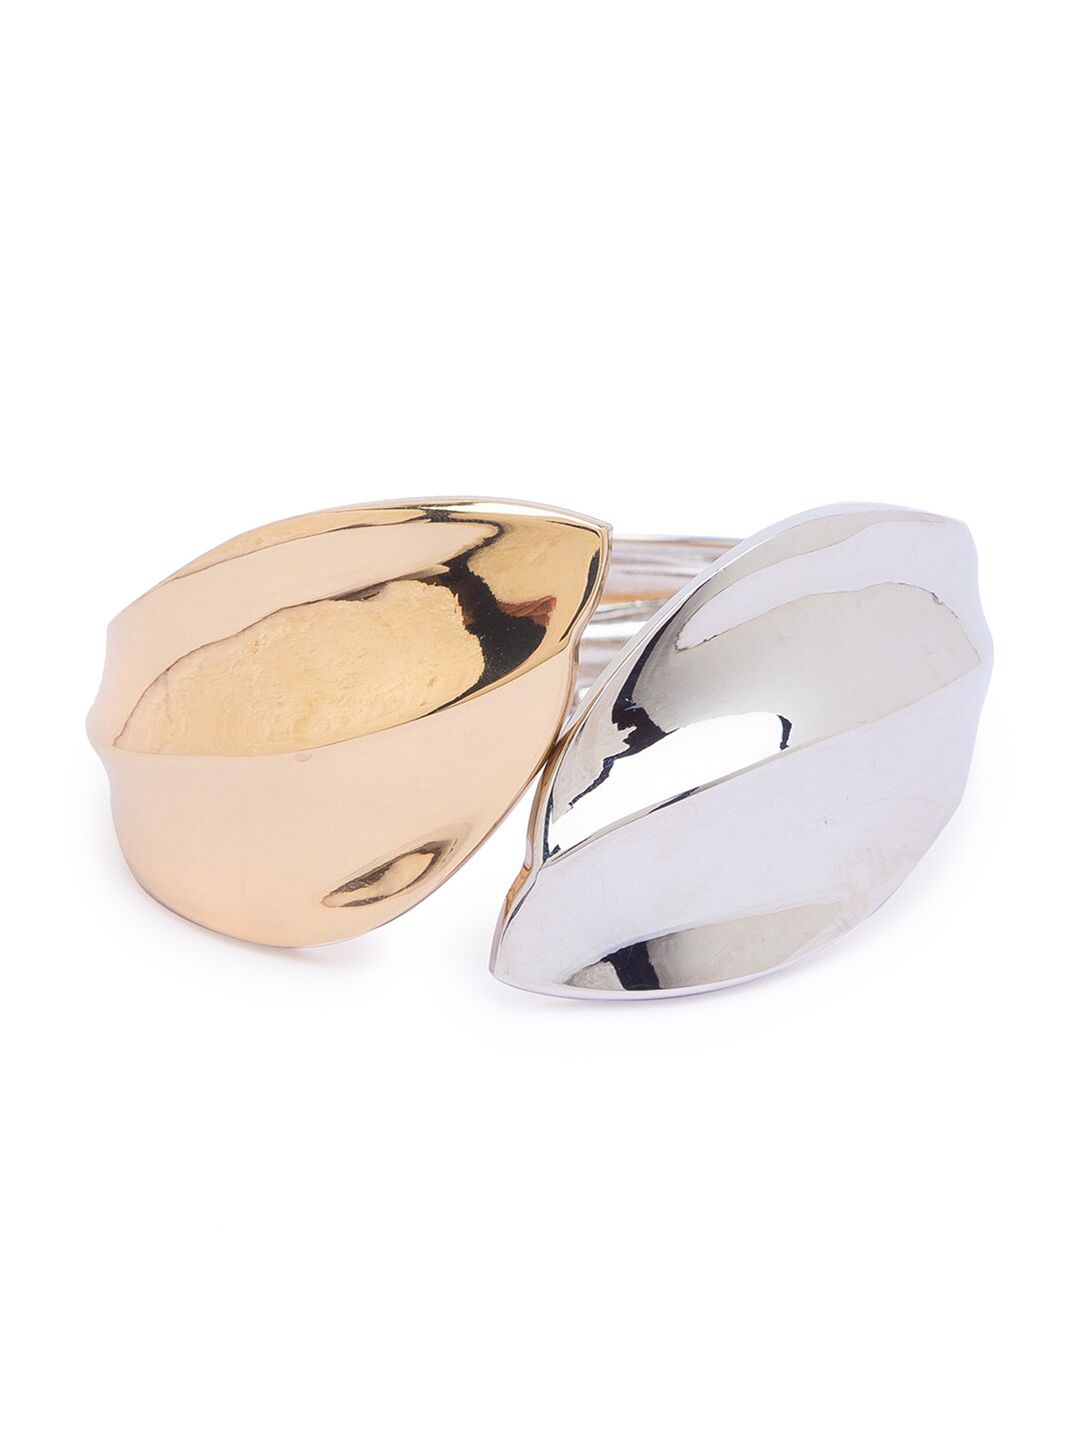 Globus Women Gold & Silver-Toned Gold-Plated Cuff Bracelet Price in India